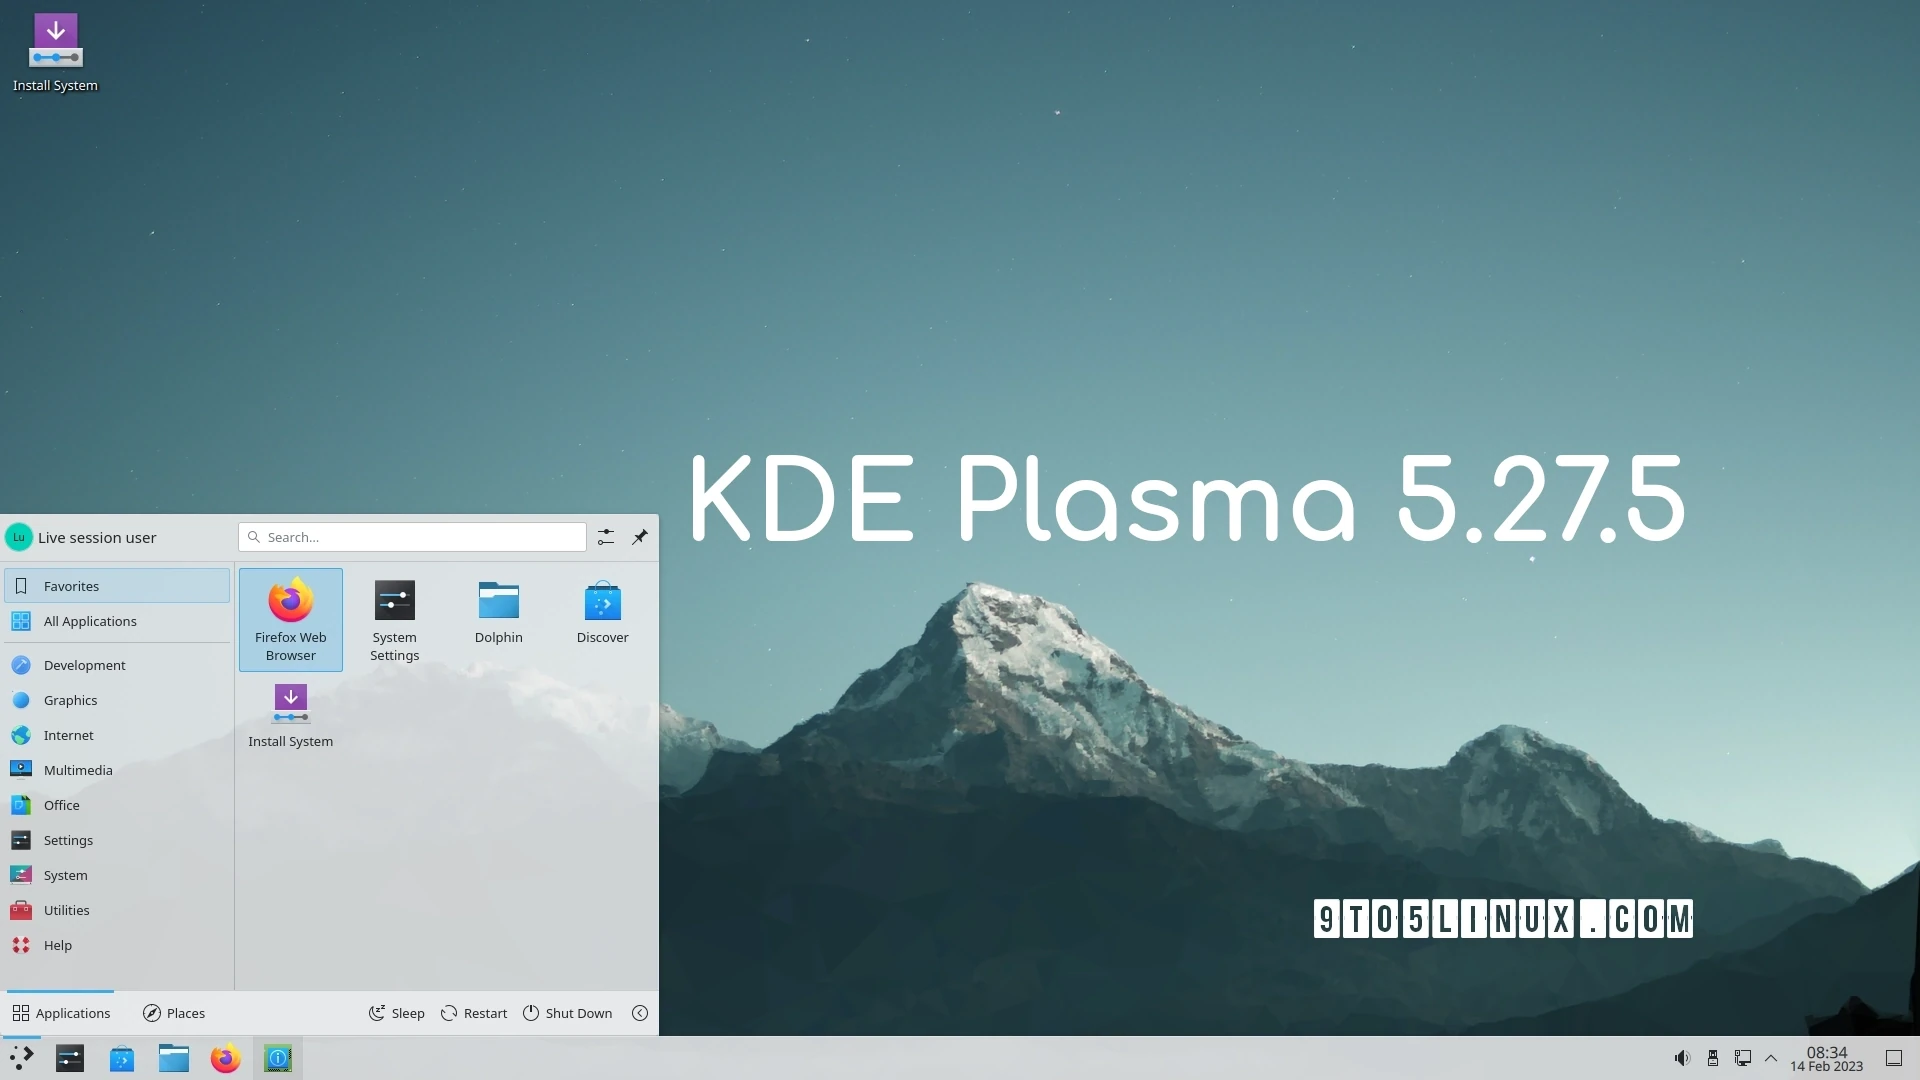 KDE Plasma 5.27.5 Improves Flatpak Permissions Page, System Settings, and More